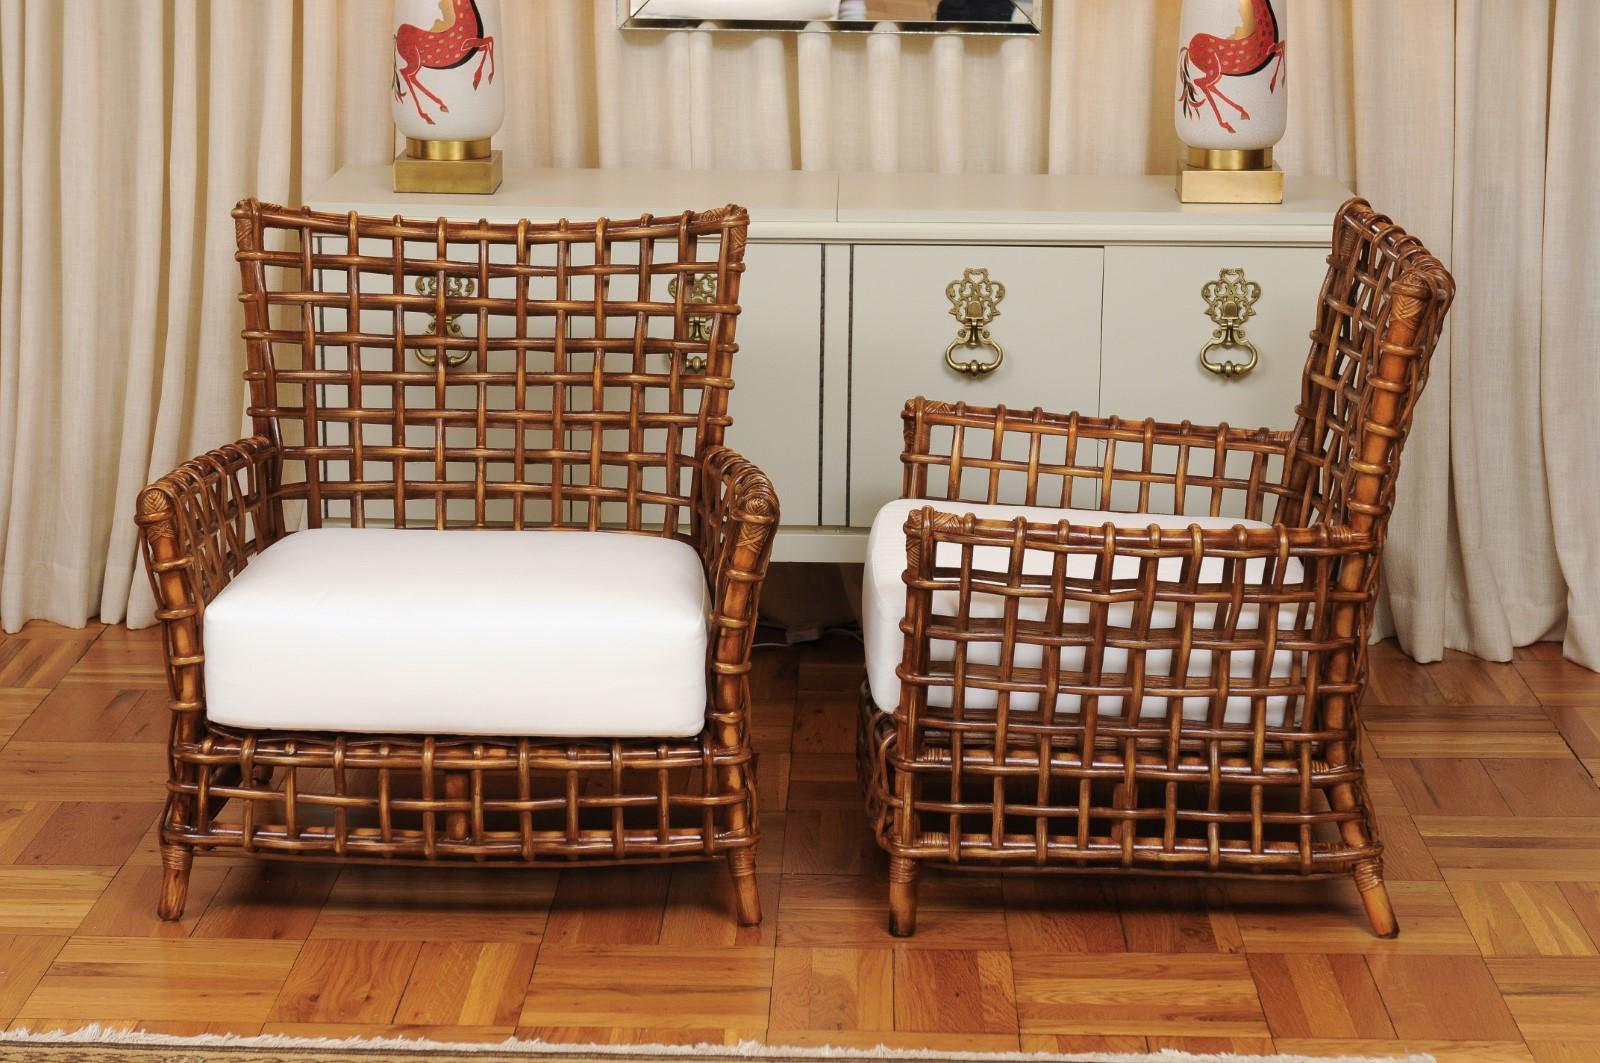 Fabulous Pair of Caramel Rattan and Cane Club Chairs - 2 Pair Available For Sale 7